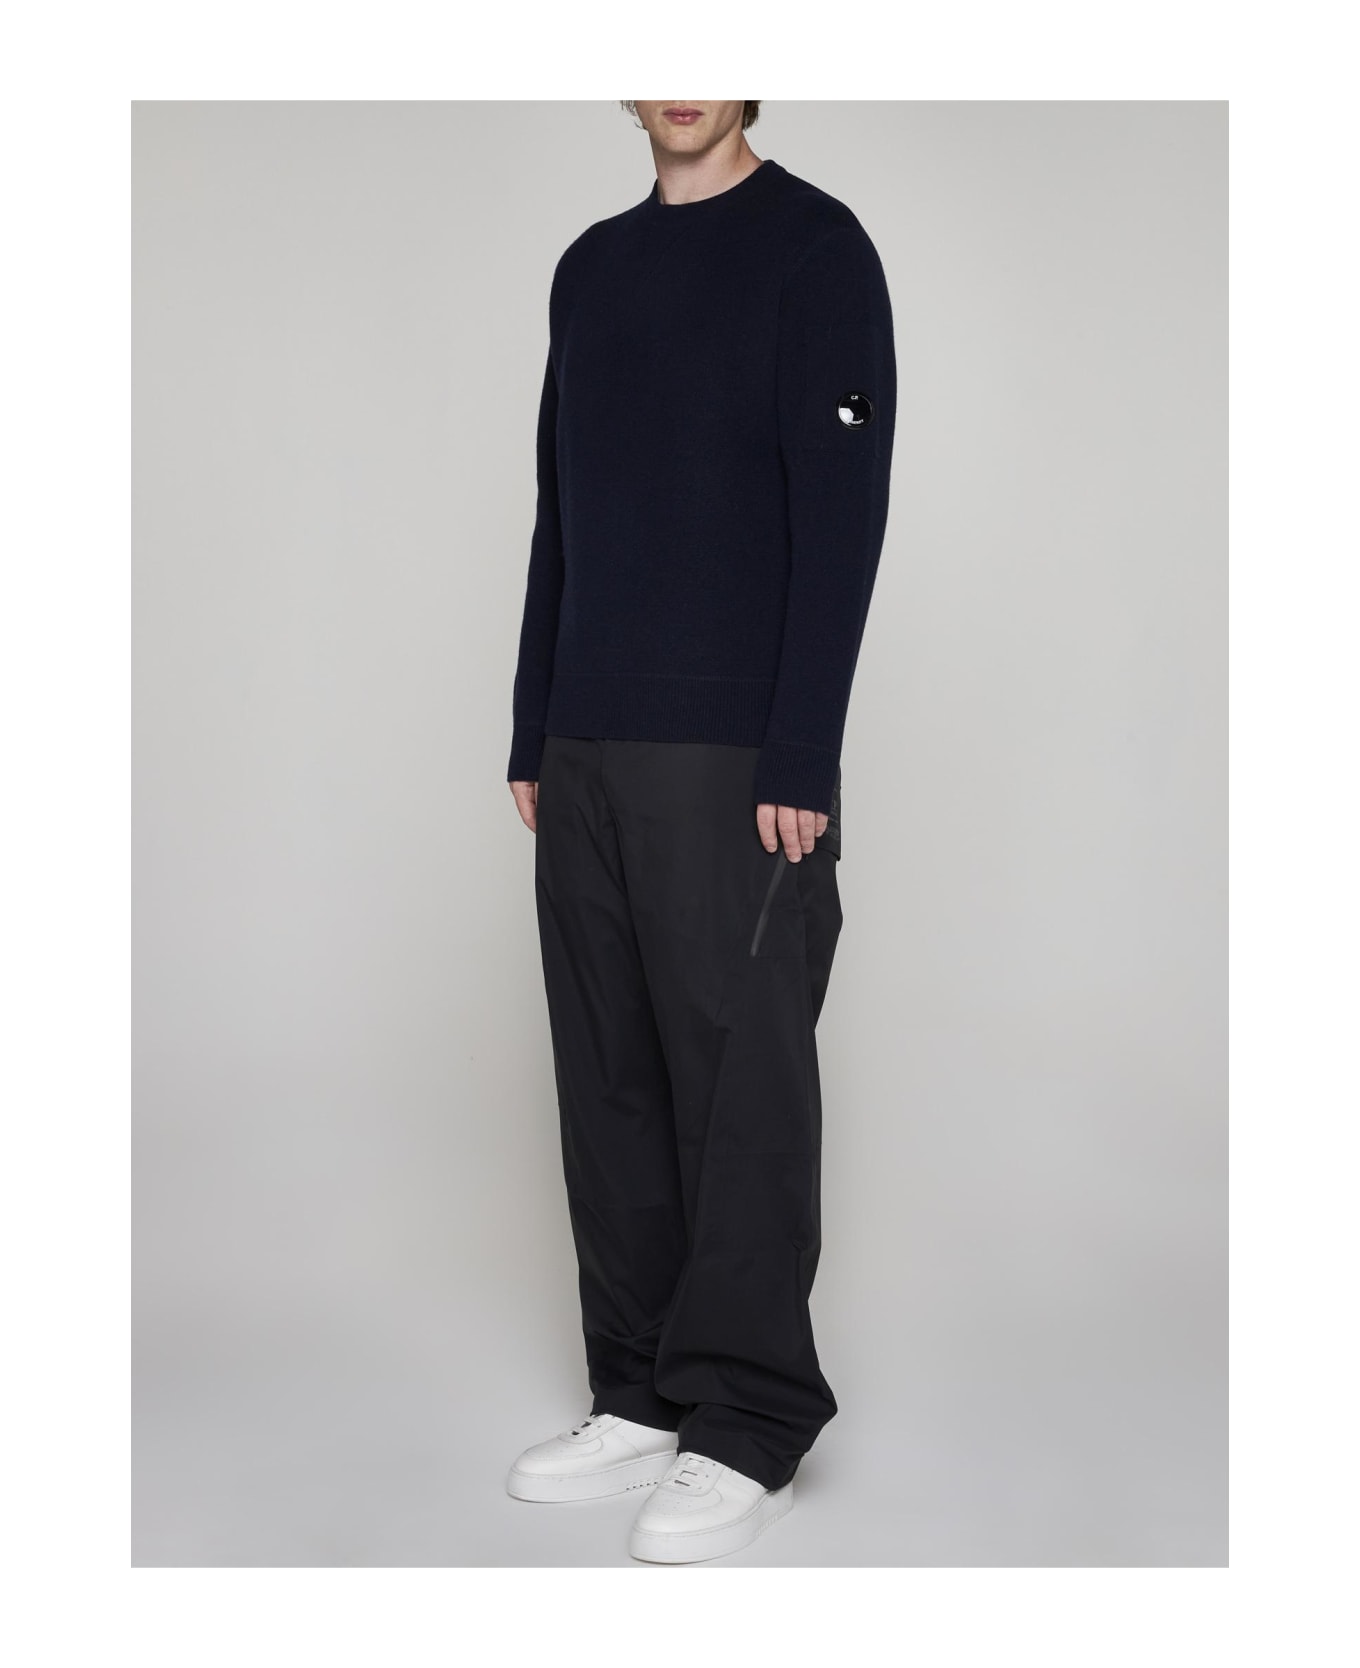 C.P. Company Lambswool Sweater - Total eclipse